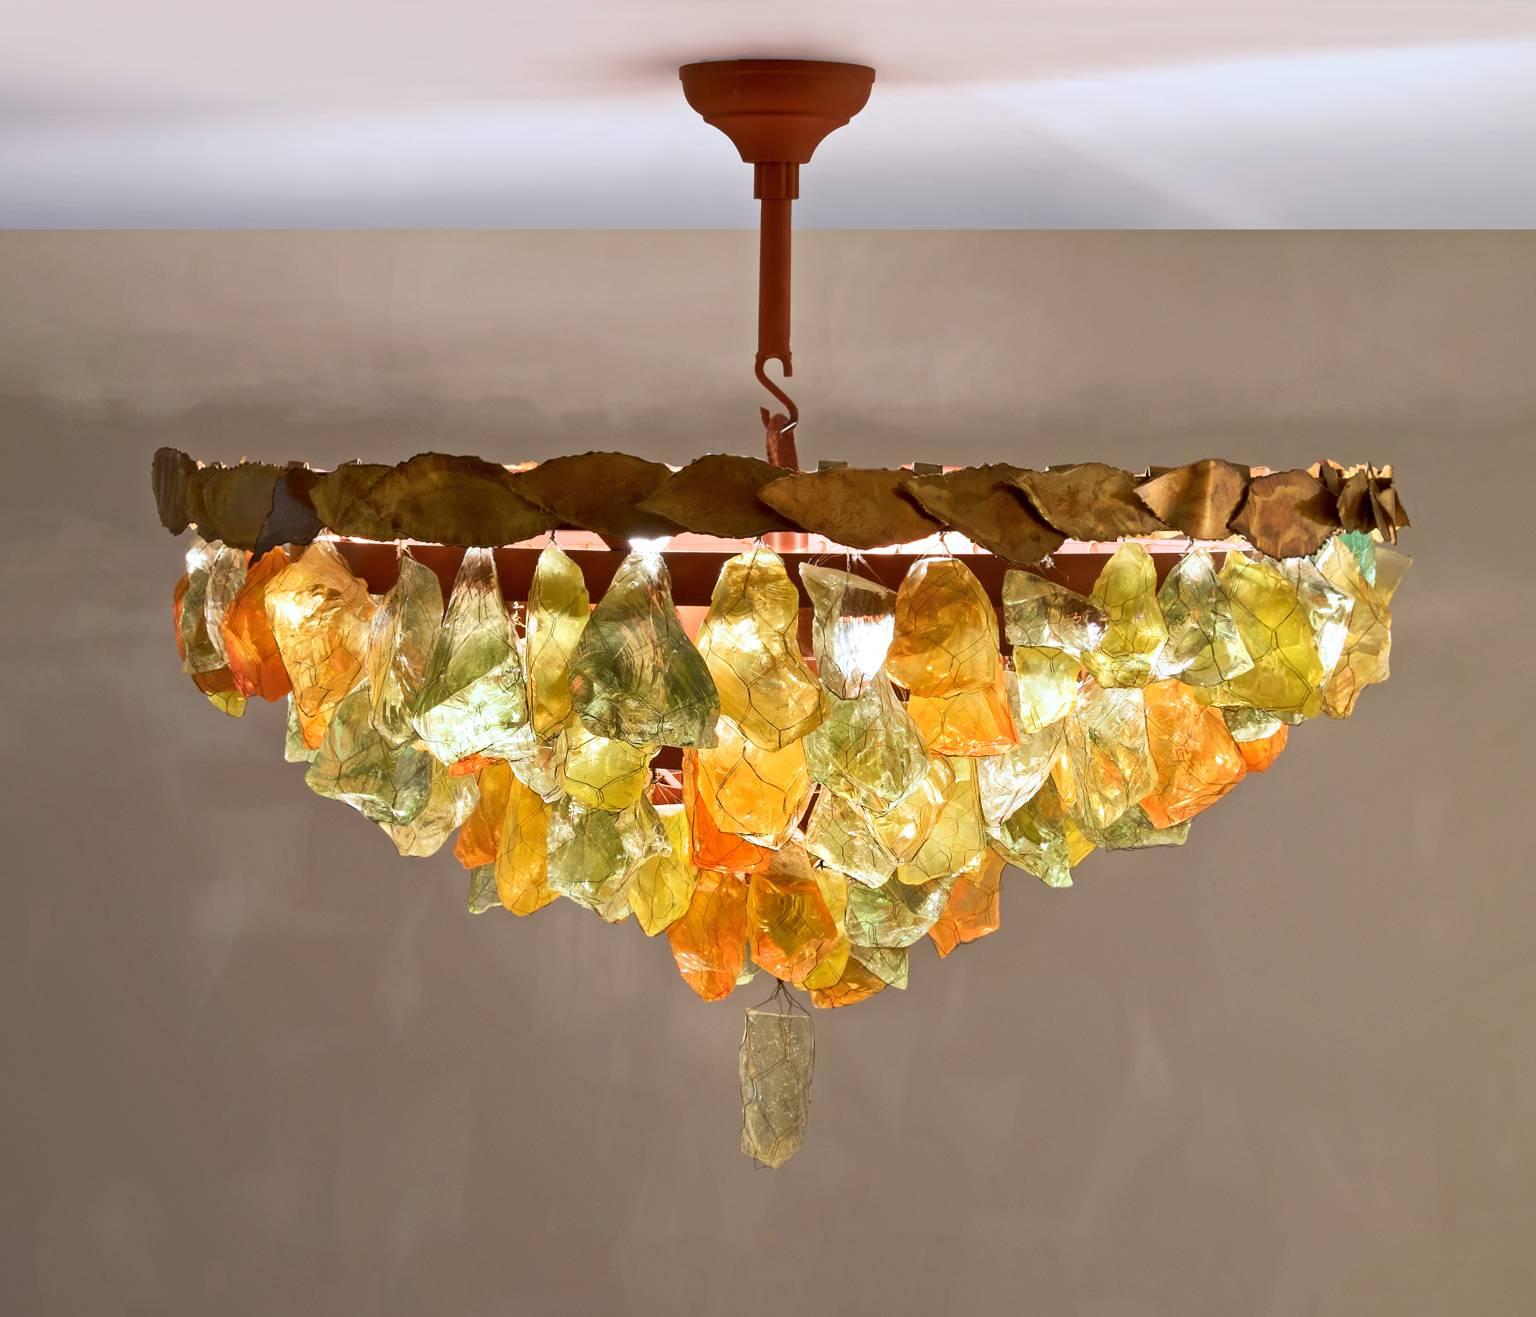 Chandelier, glass, brass, metal, France, 1950s.

This pendant features a diversity of different forms of and colors of glass chunks. The chunks feature autumnal colors. The variety of organic, asymmetrical glass elements is held together with thin